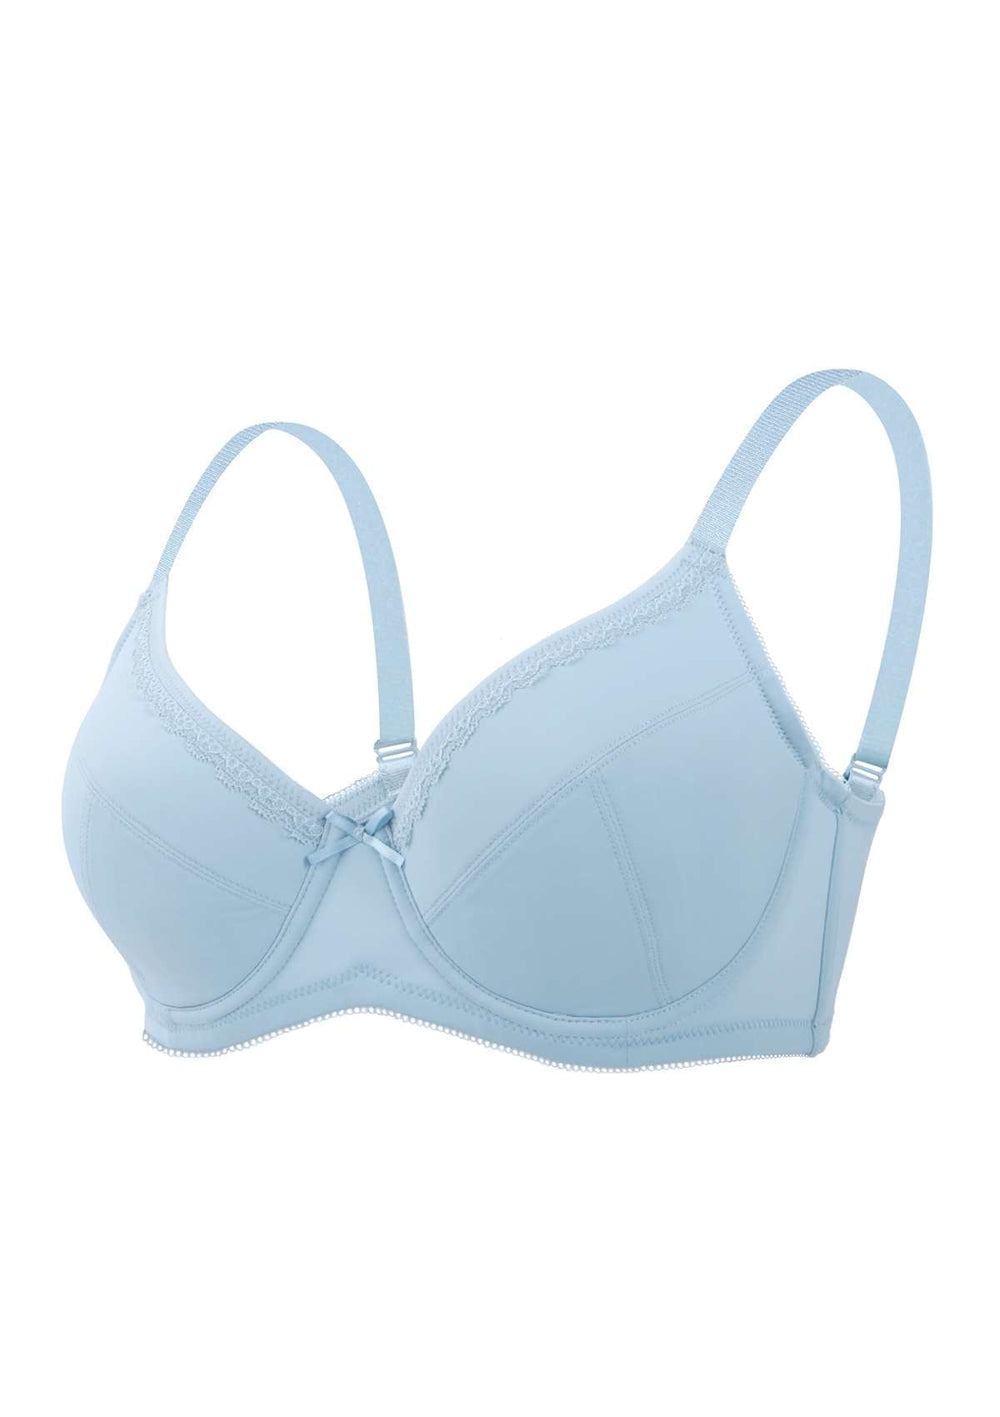 HSIA Bra for Women Push Up,Fashion Deep Cup Bras Lightly